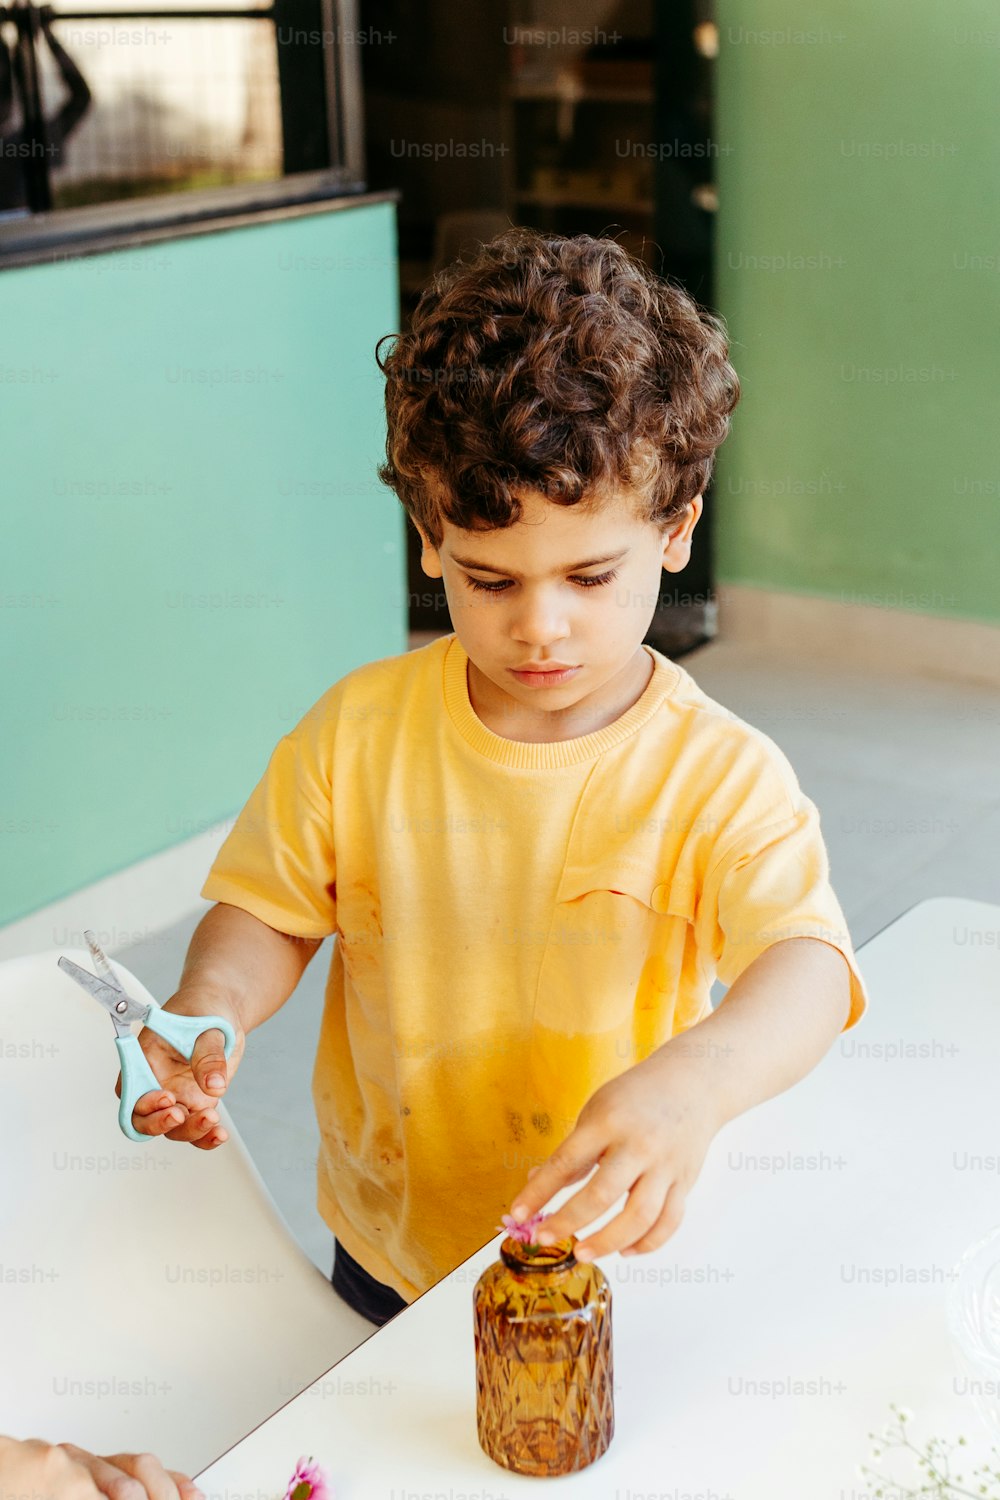 a young boy cutting a piece of cake with a pair of scissors